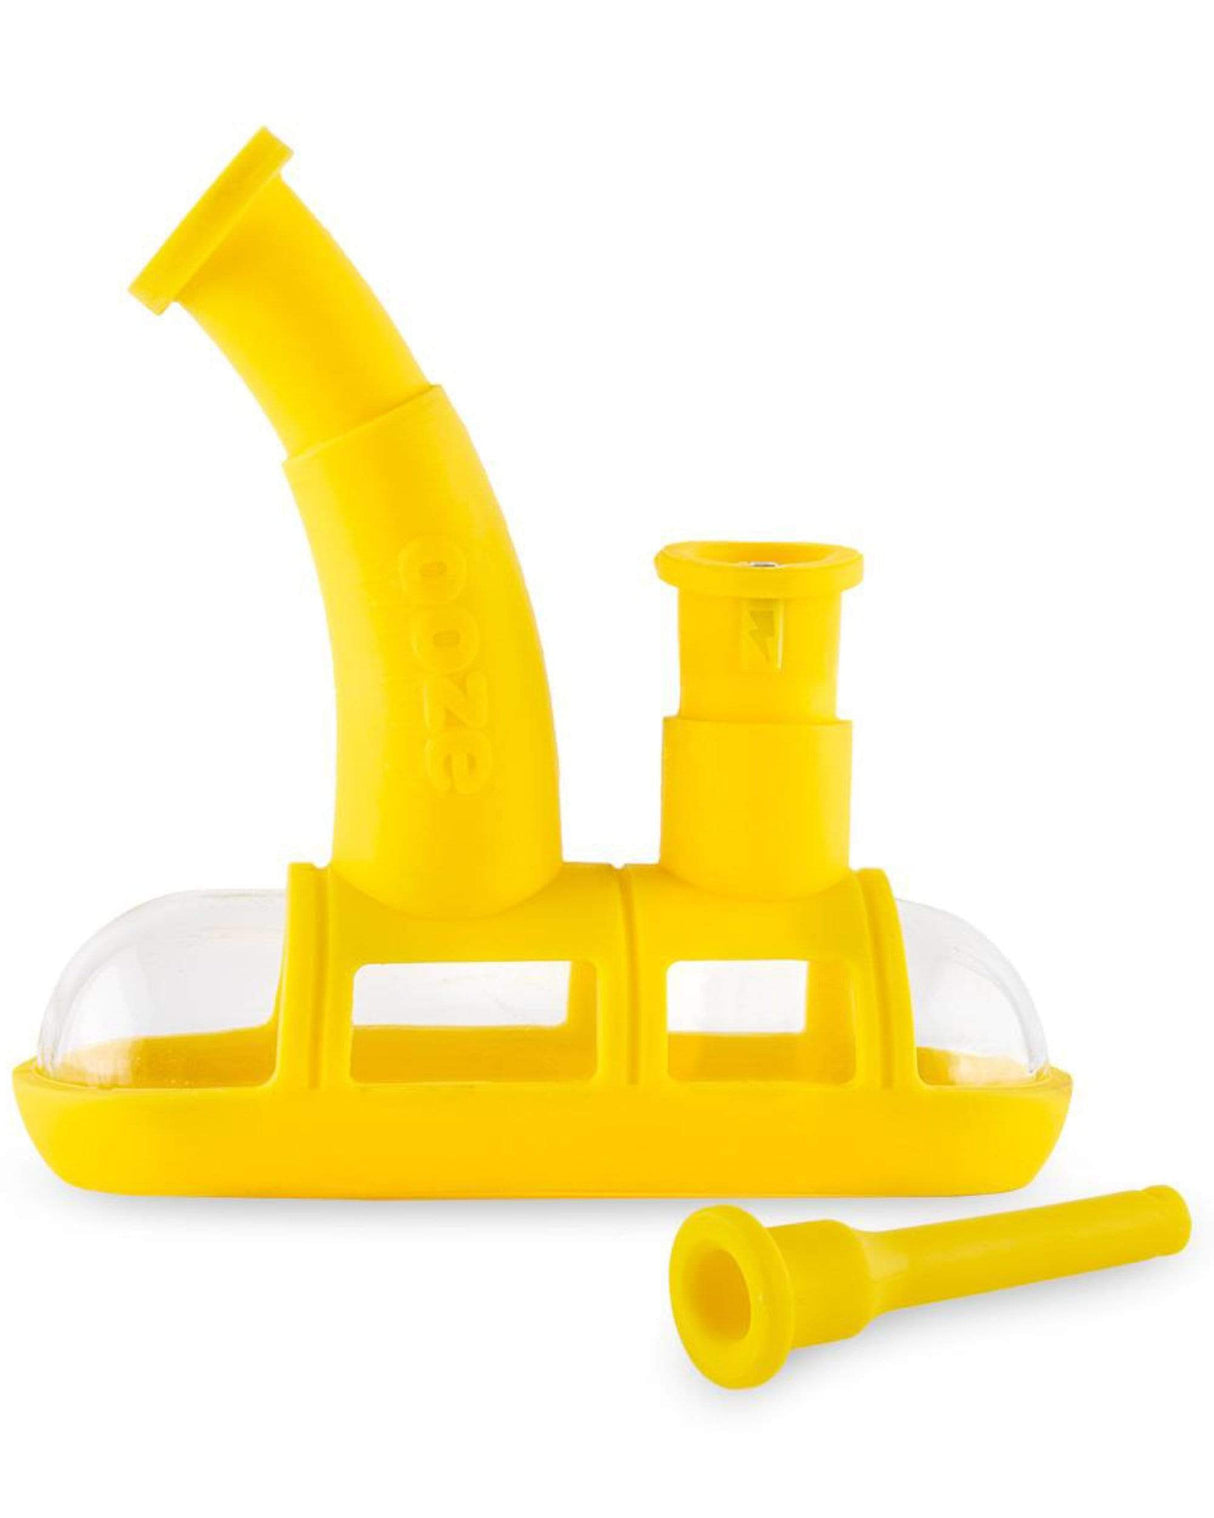 Ooze Steamboat Silicone Bubbler in Yellow, 90 Degree Joint, for Dry Herbs and Concentrates